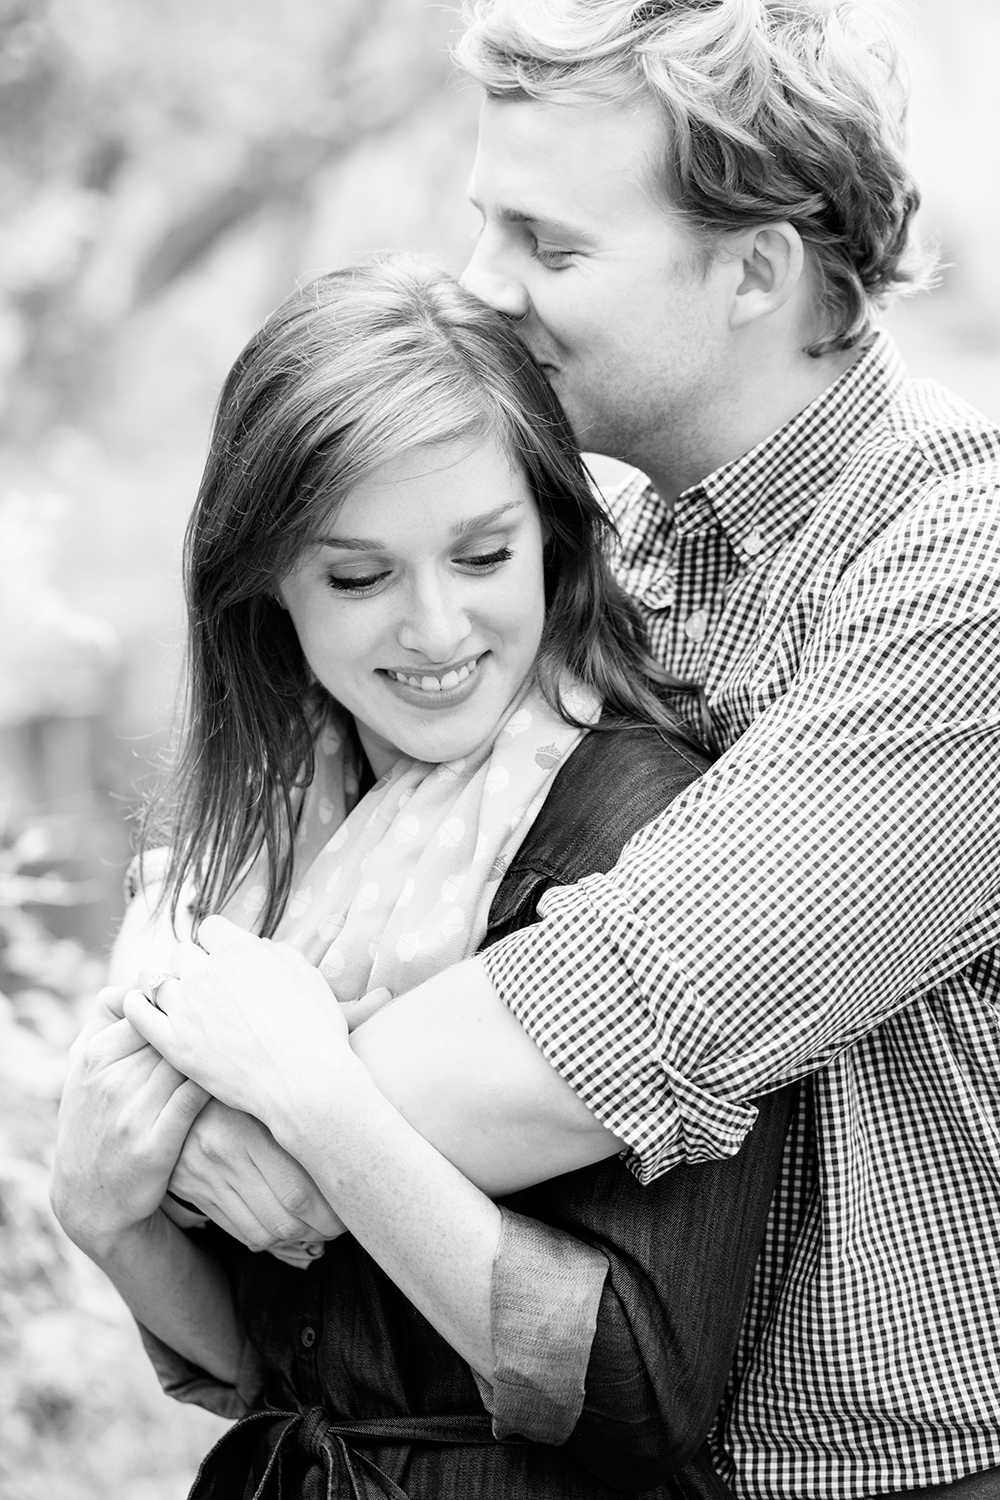 Best Engagement Moments of 2015 - Image Property of www.j-dphoto.com